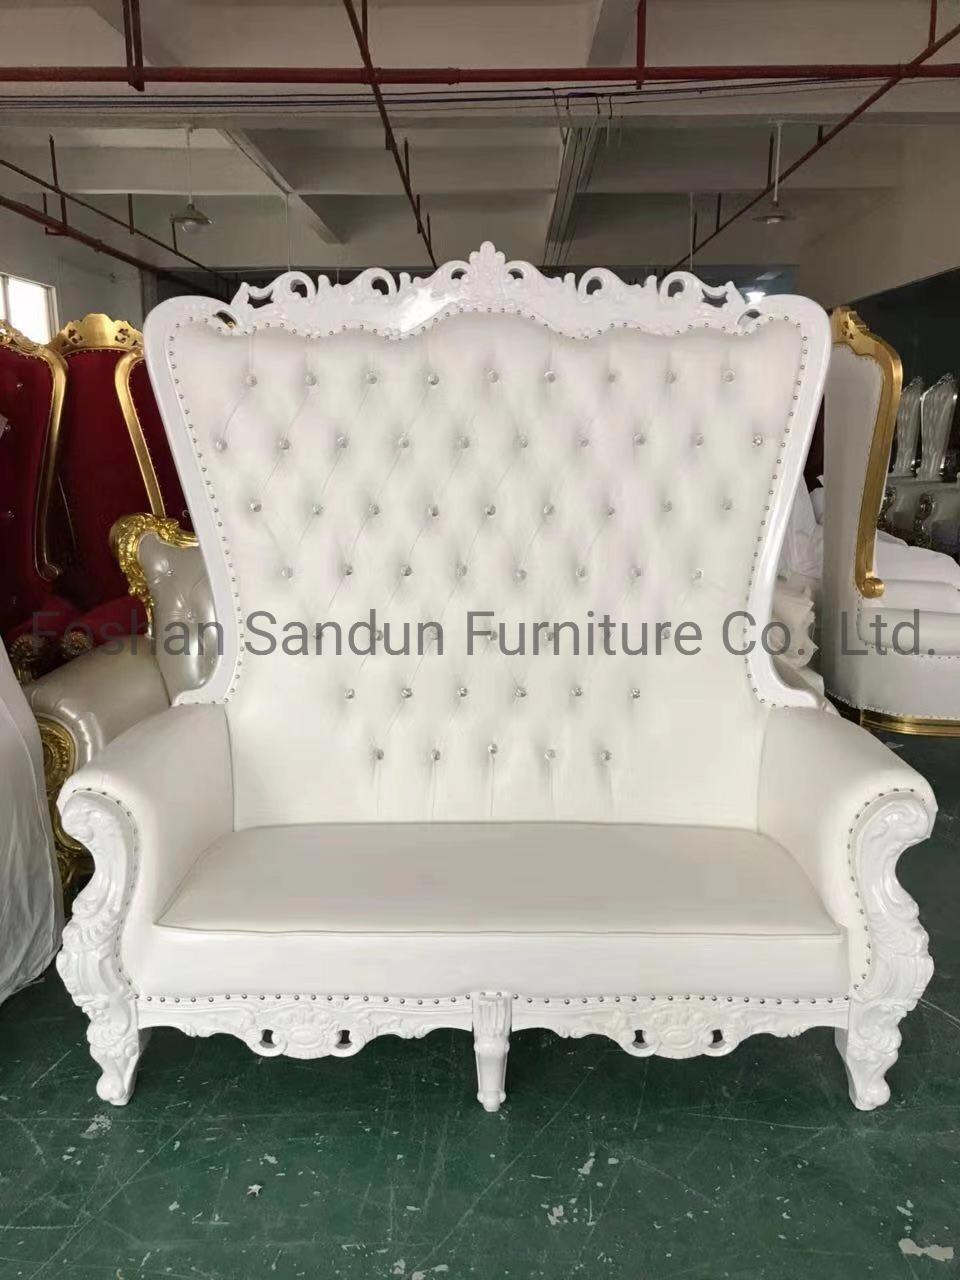 New Double Swan Design Wedding Event Royal Chair for Bride and Groom